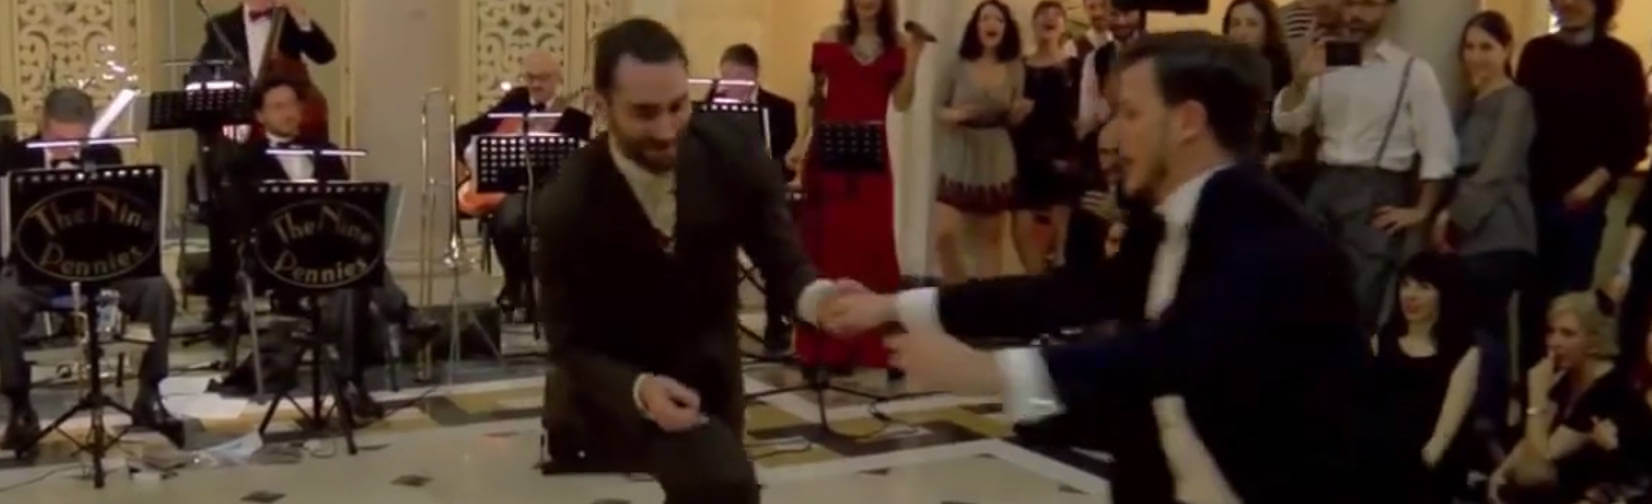 First Dance by a same sex couple